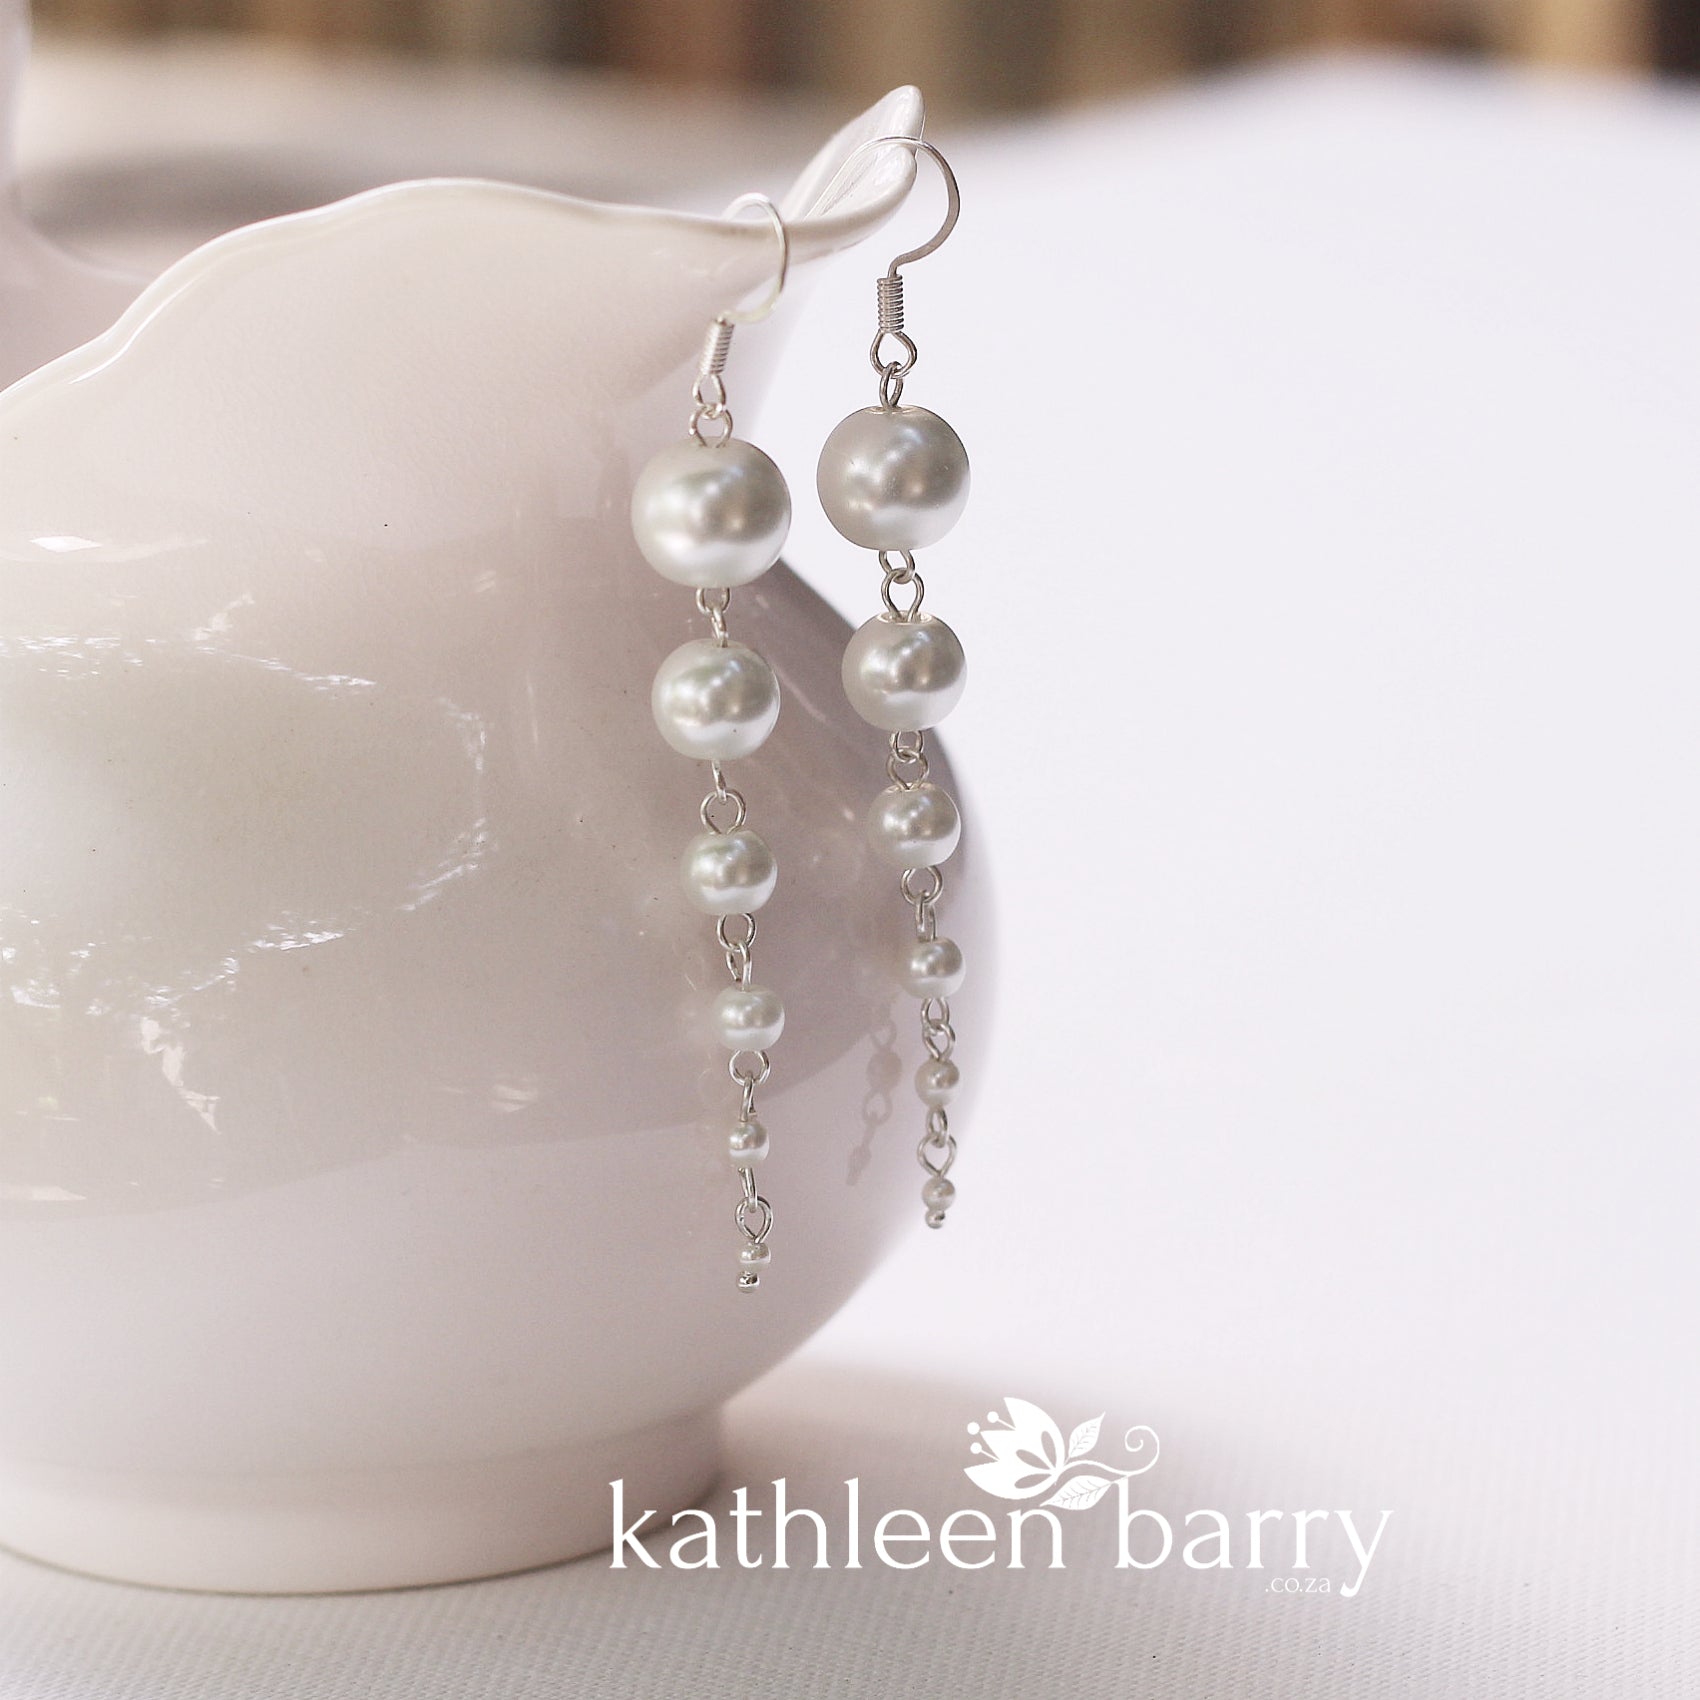 Pearl drop earrings grading in size from big to small cascading pearls